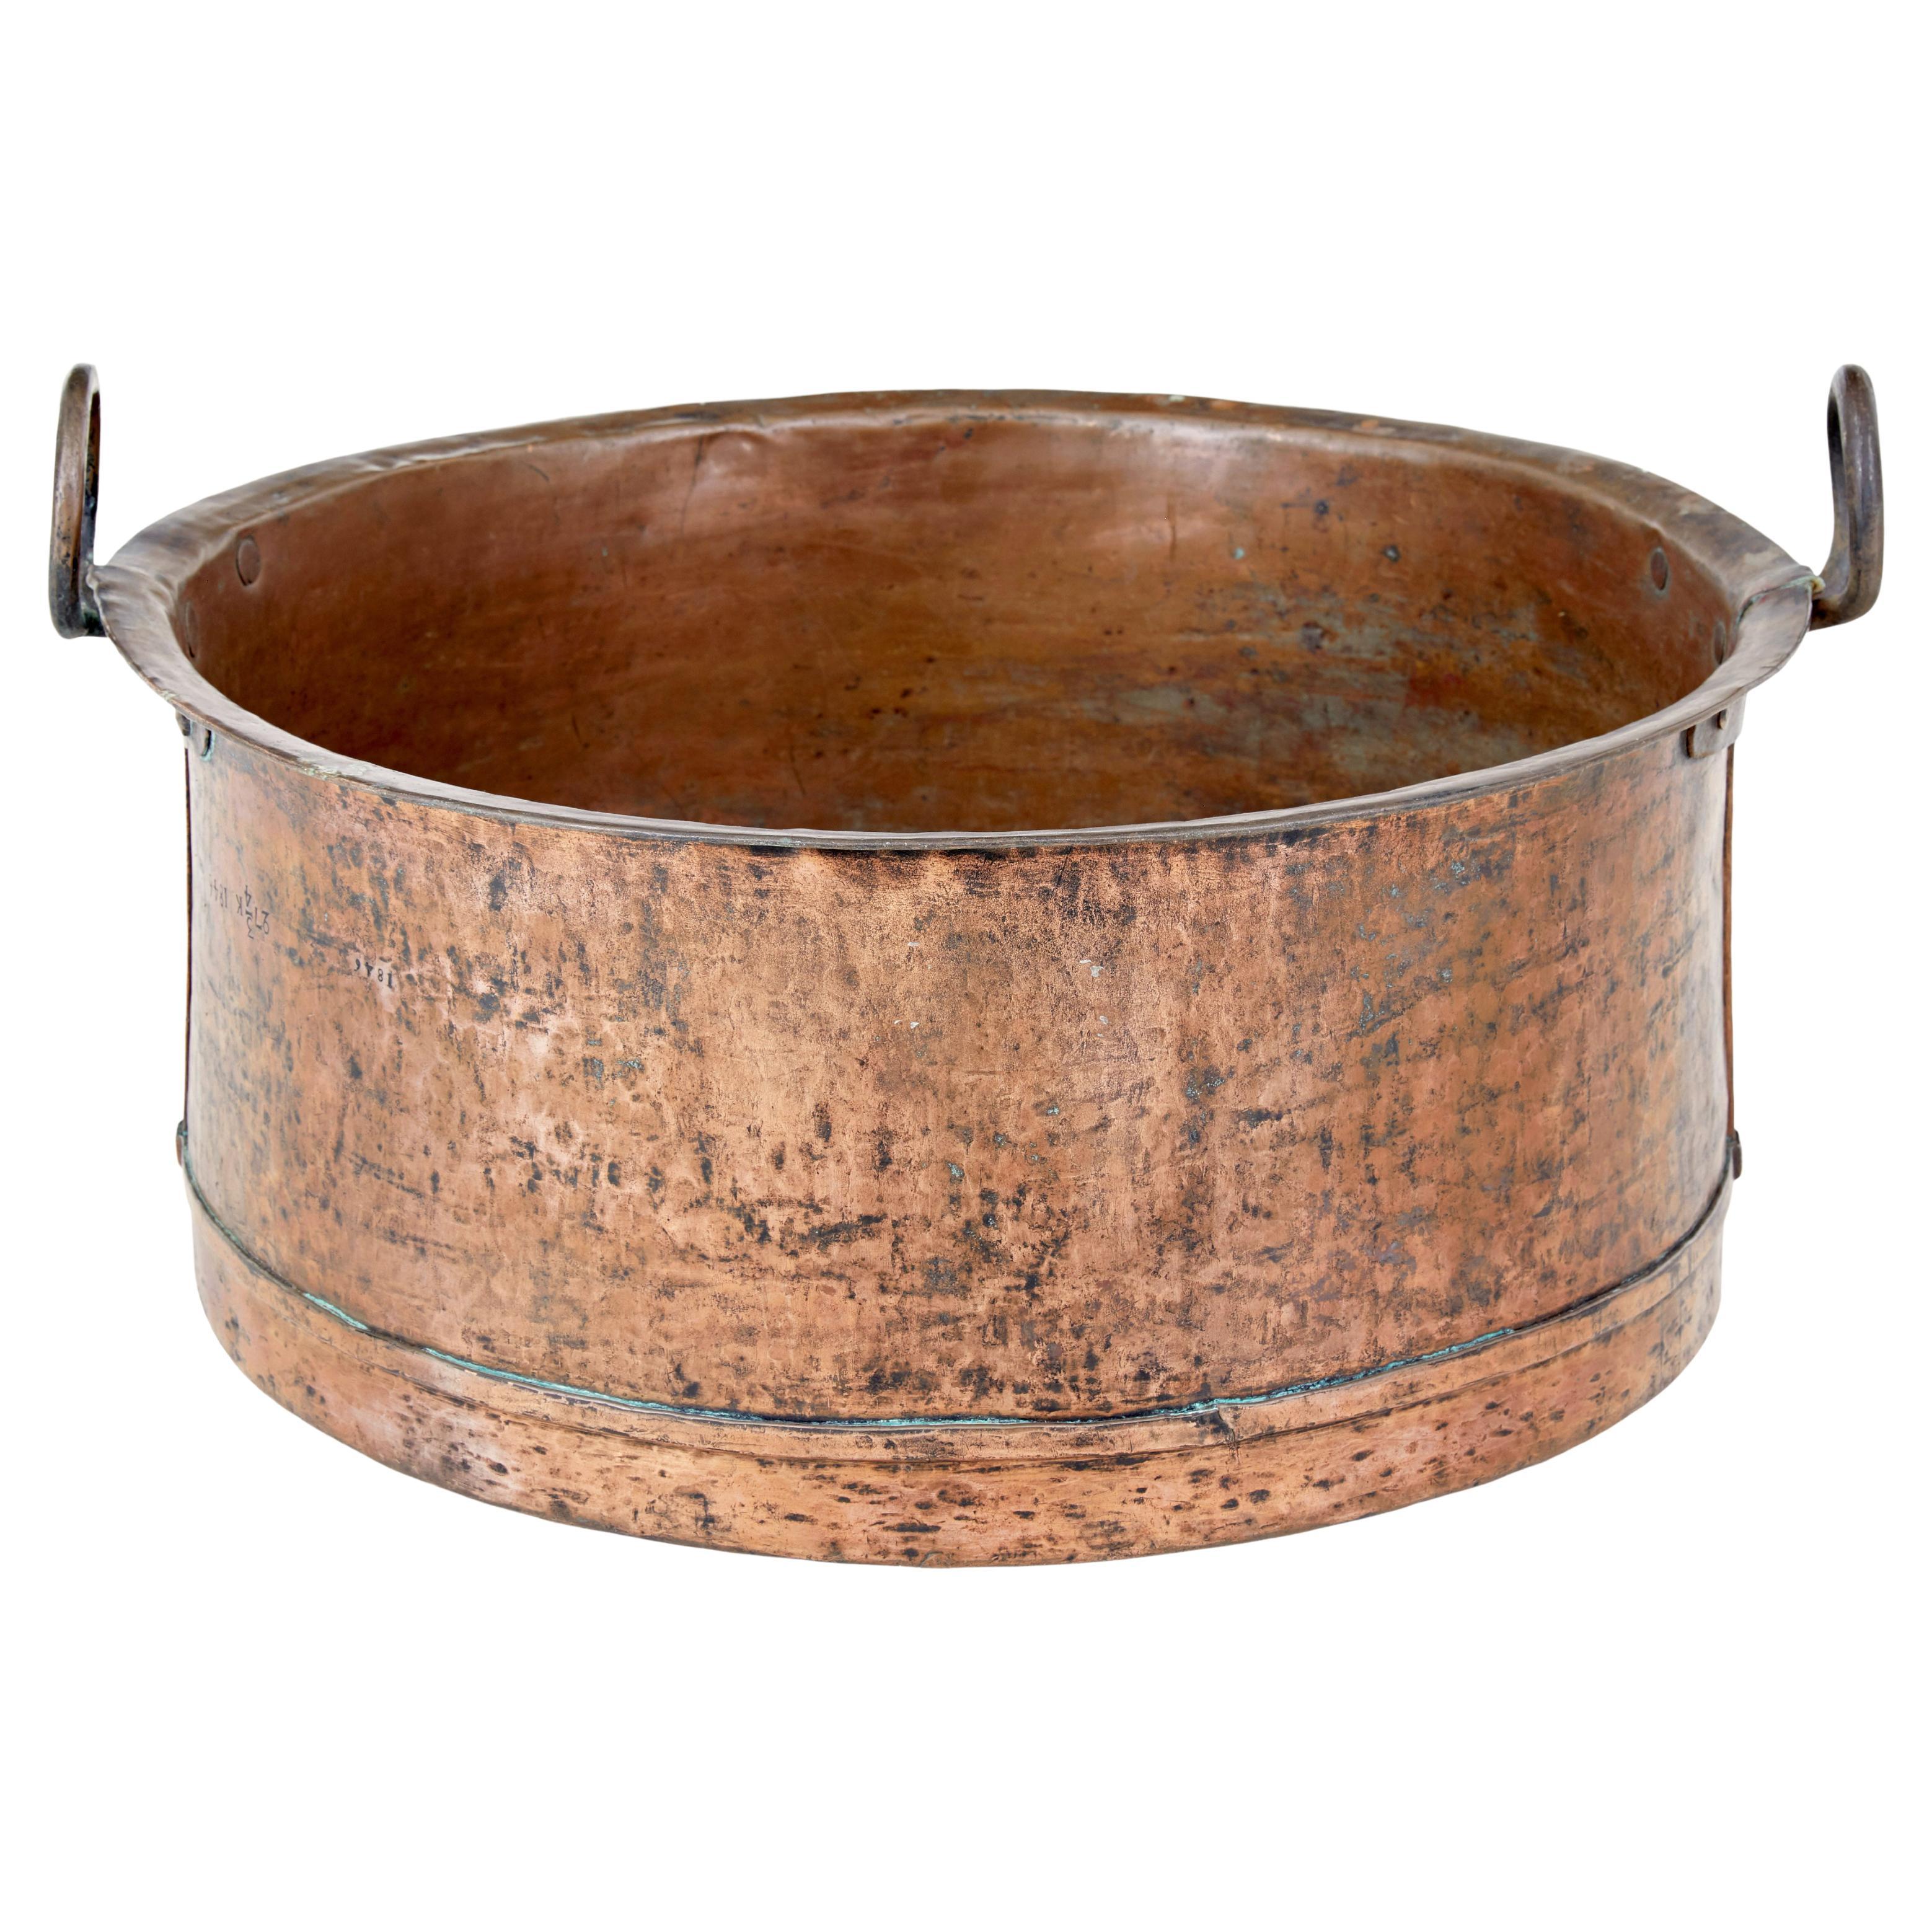 Mid 19th century copper cooking vessel For Sale